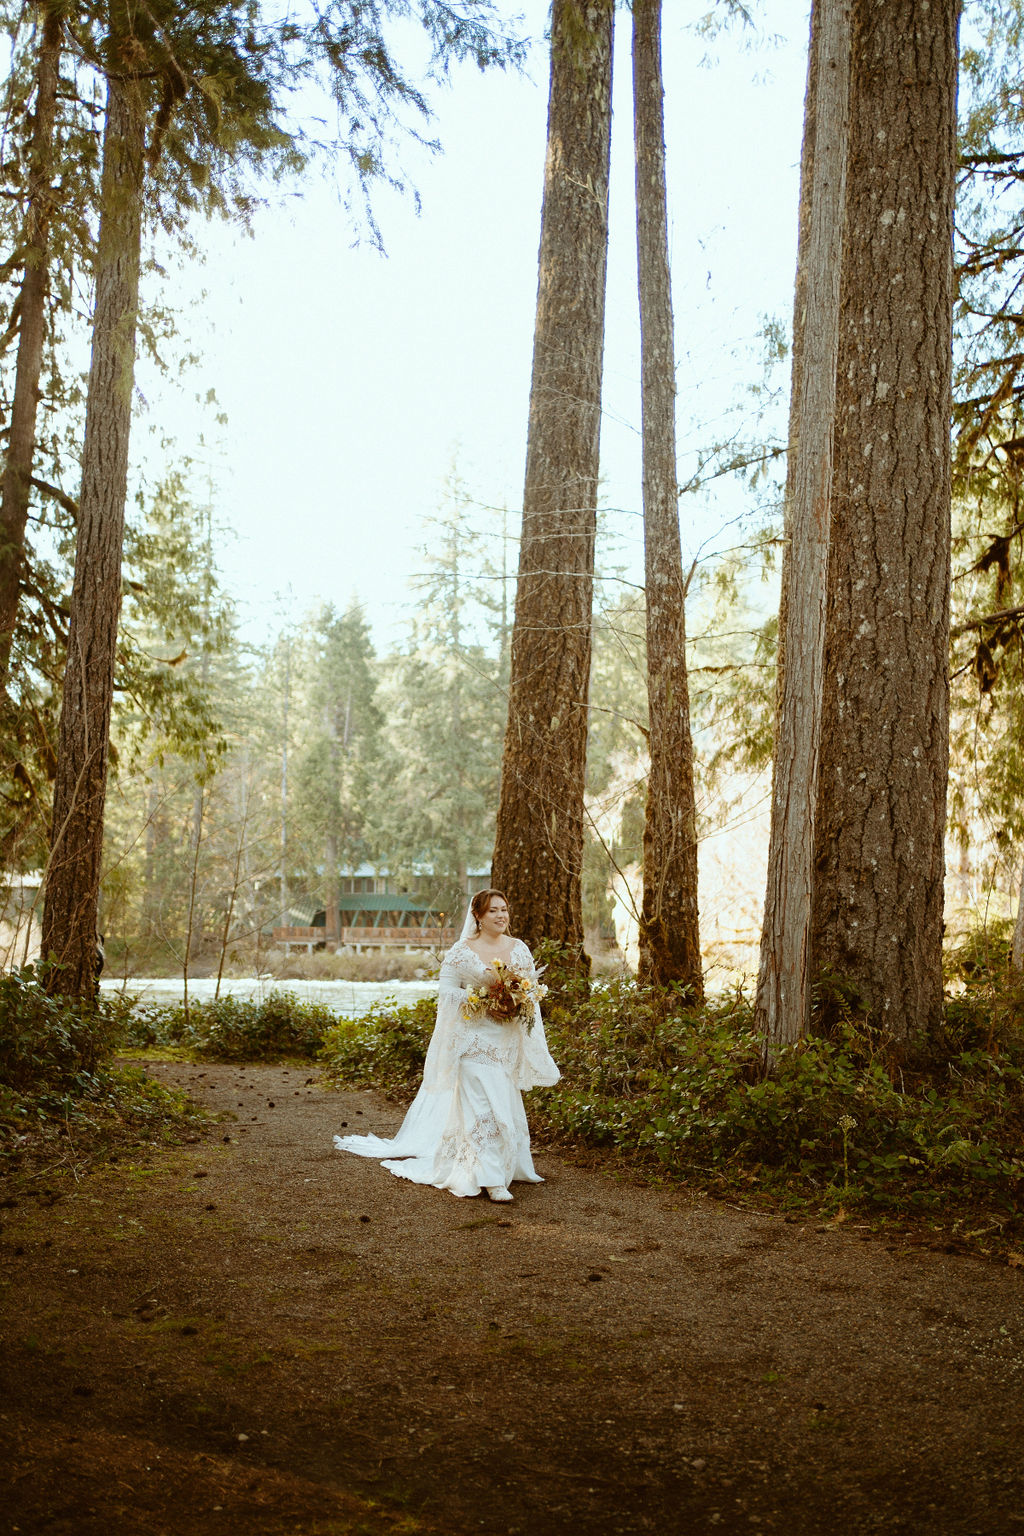 The bride walking down the aisle in a long sleeve lace wedding dress with a long veil holding her bouquet 